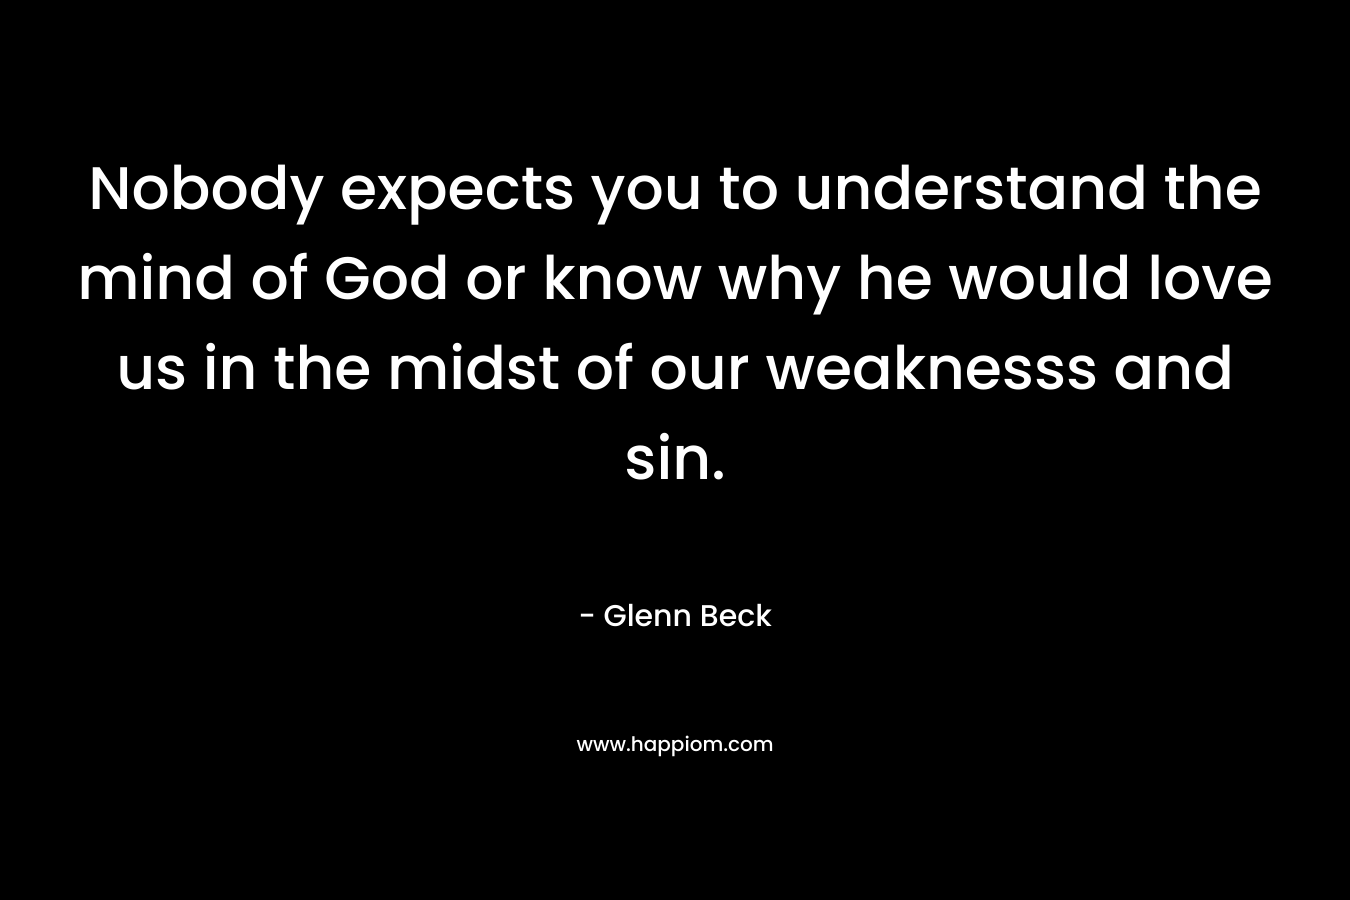 Nobody expects you to understand the mind of God or know why he would love us in the midst of our weaknesss and sin. – Glenn Beck